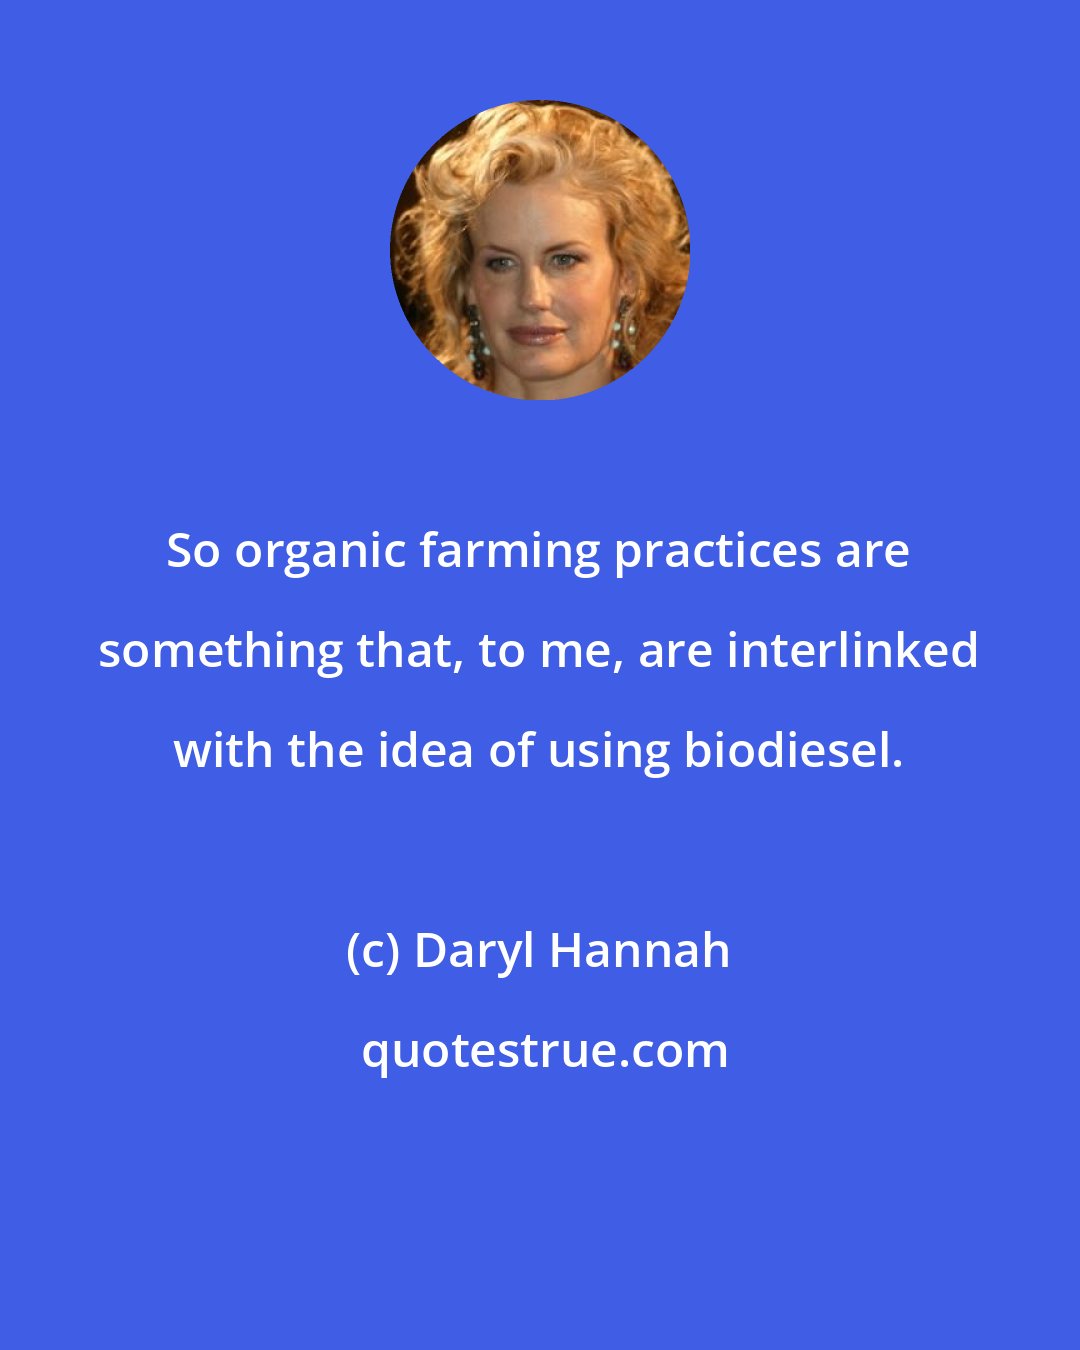 Daryl Hannah: So organic farming practices are something that, to me, are interlinked with the idea of using biodiesel.